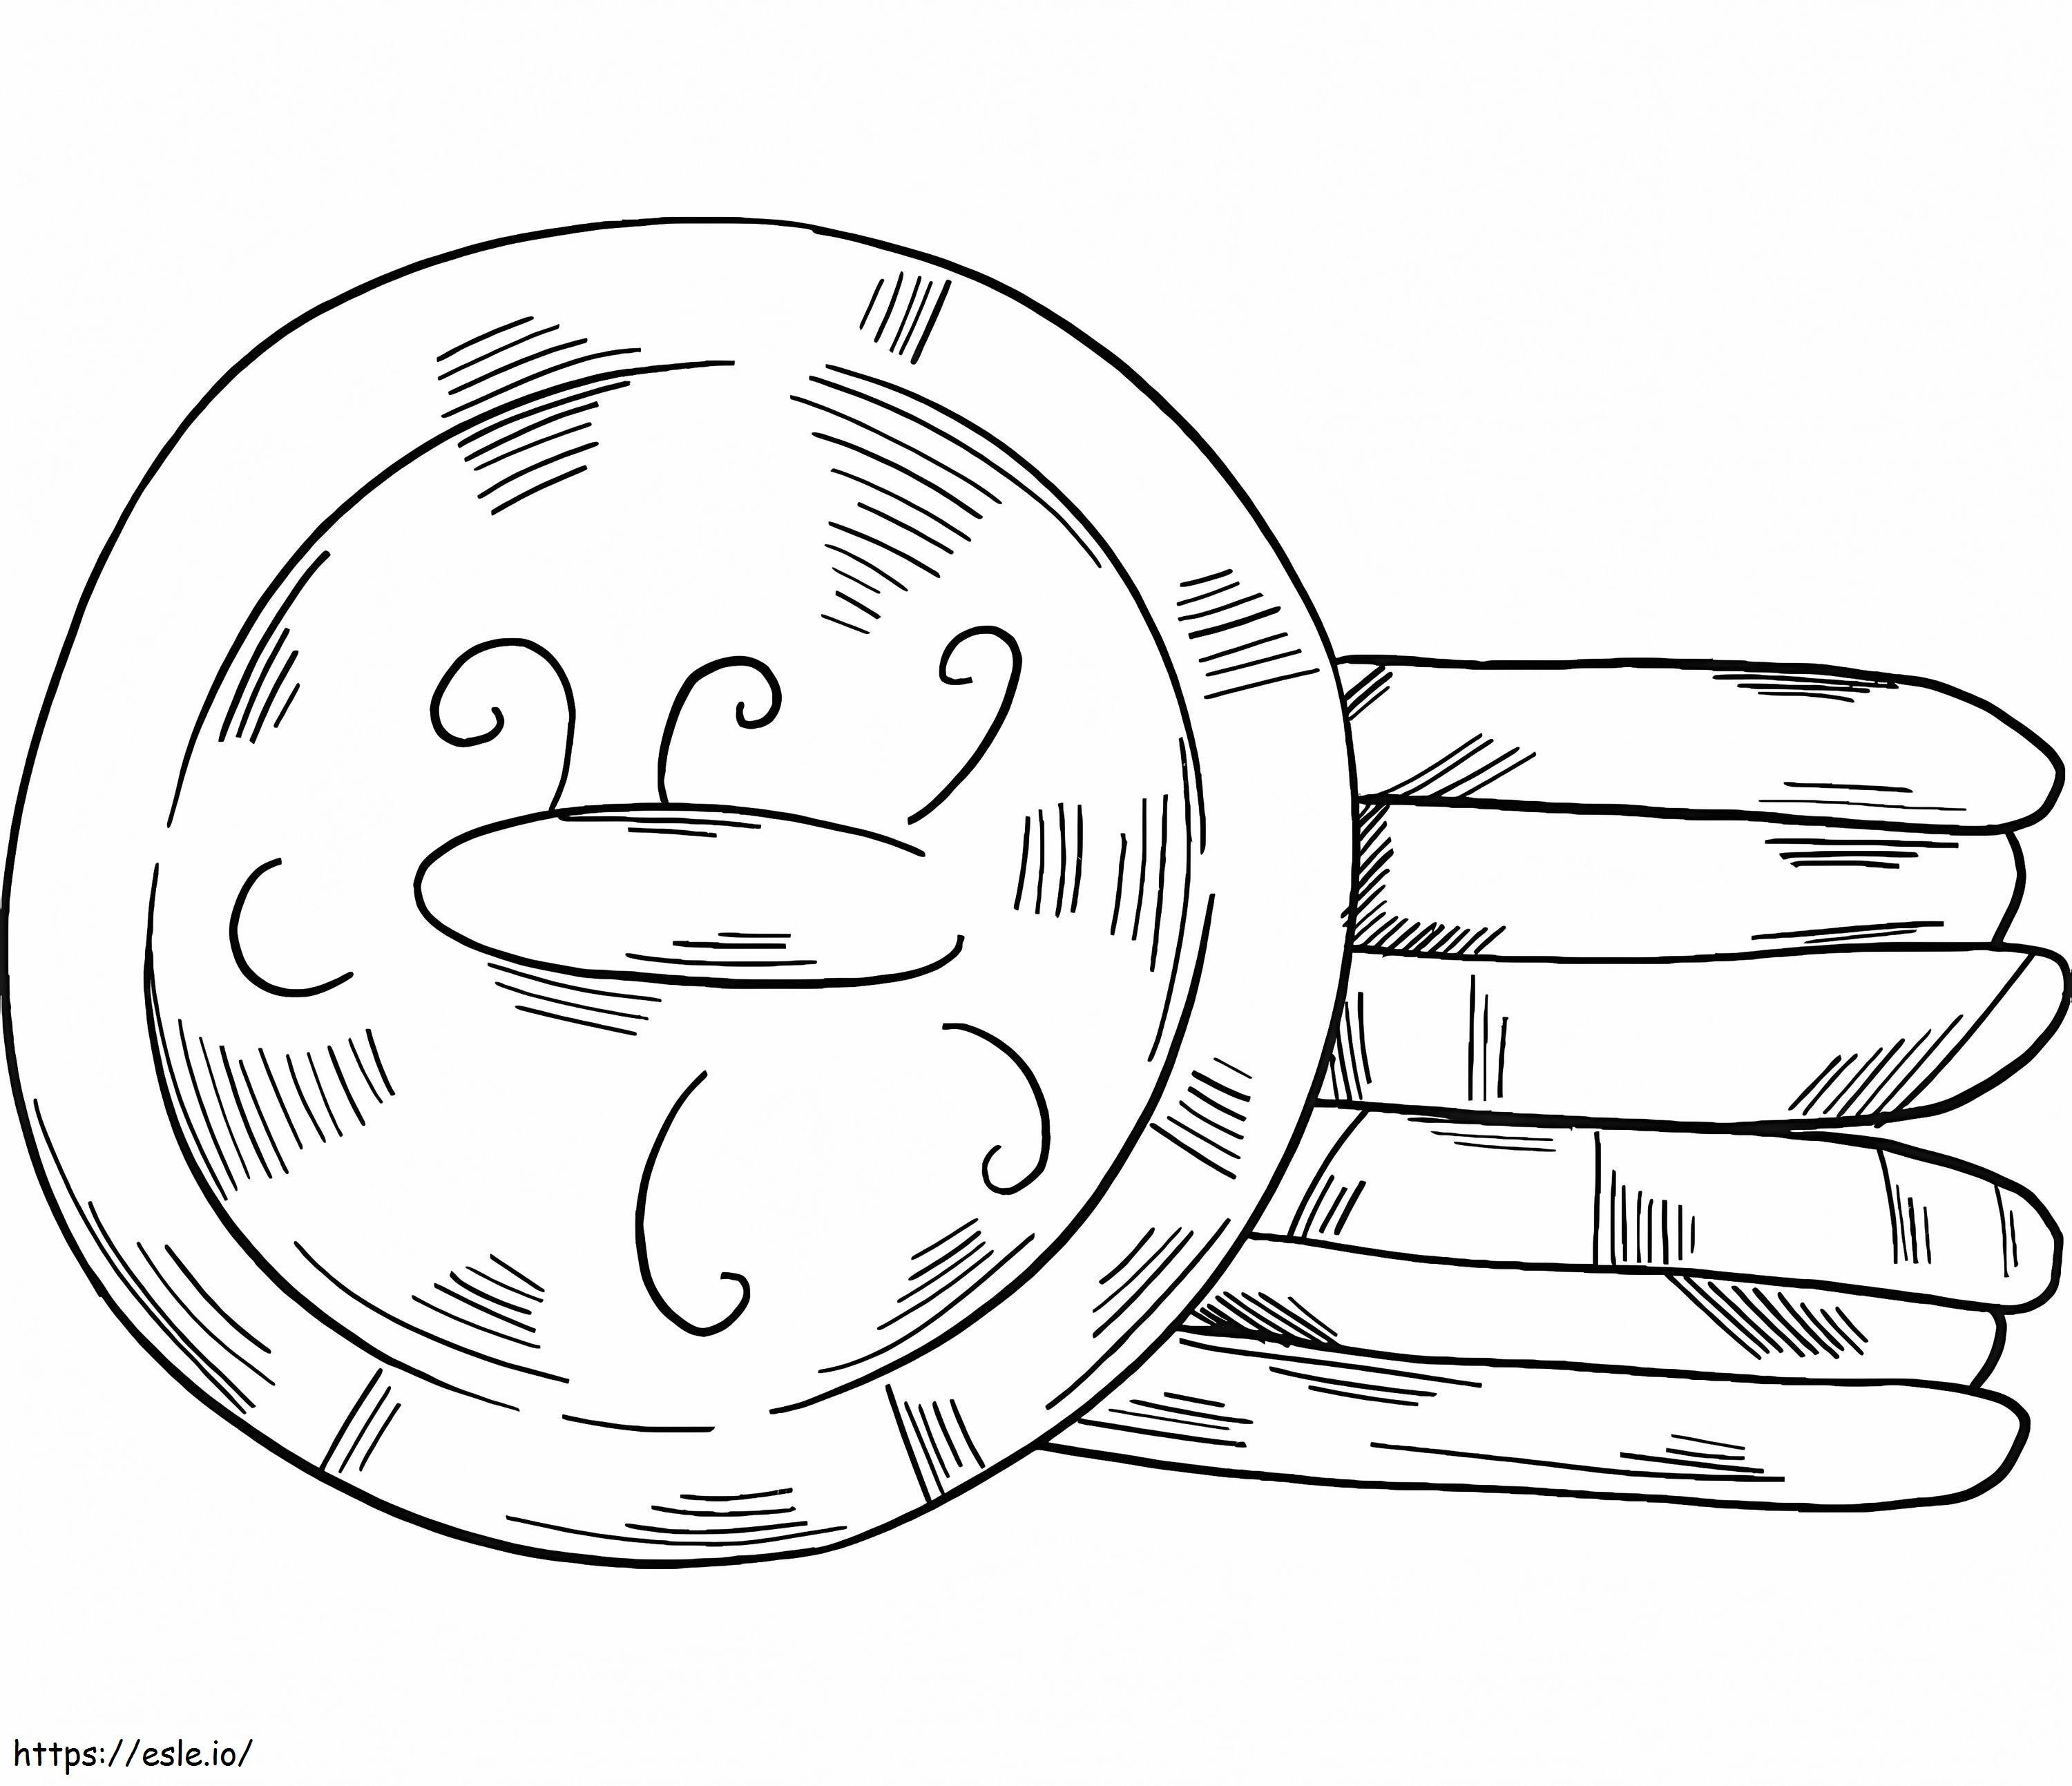 Cookies 1 coloring page